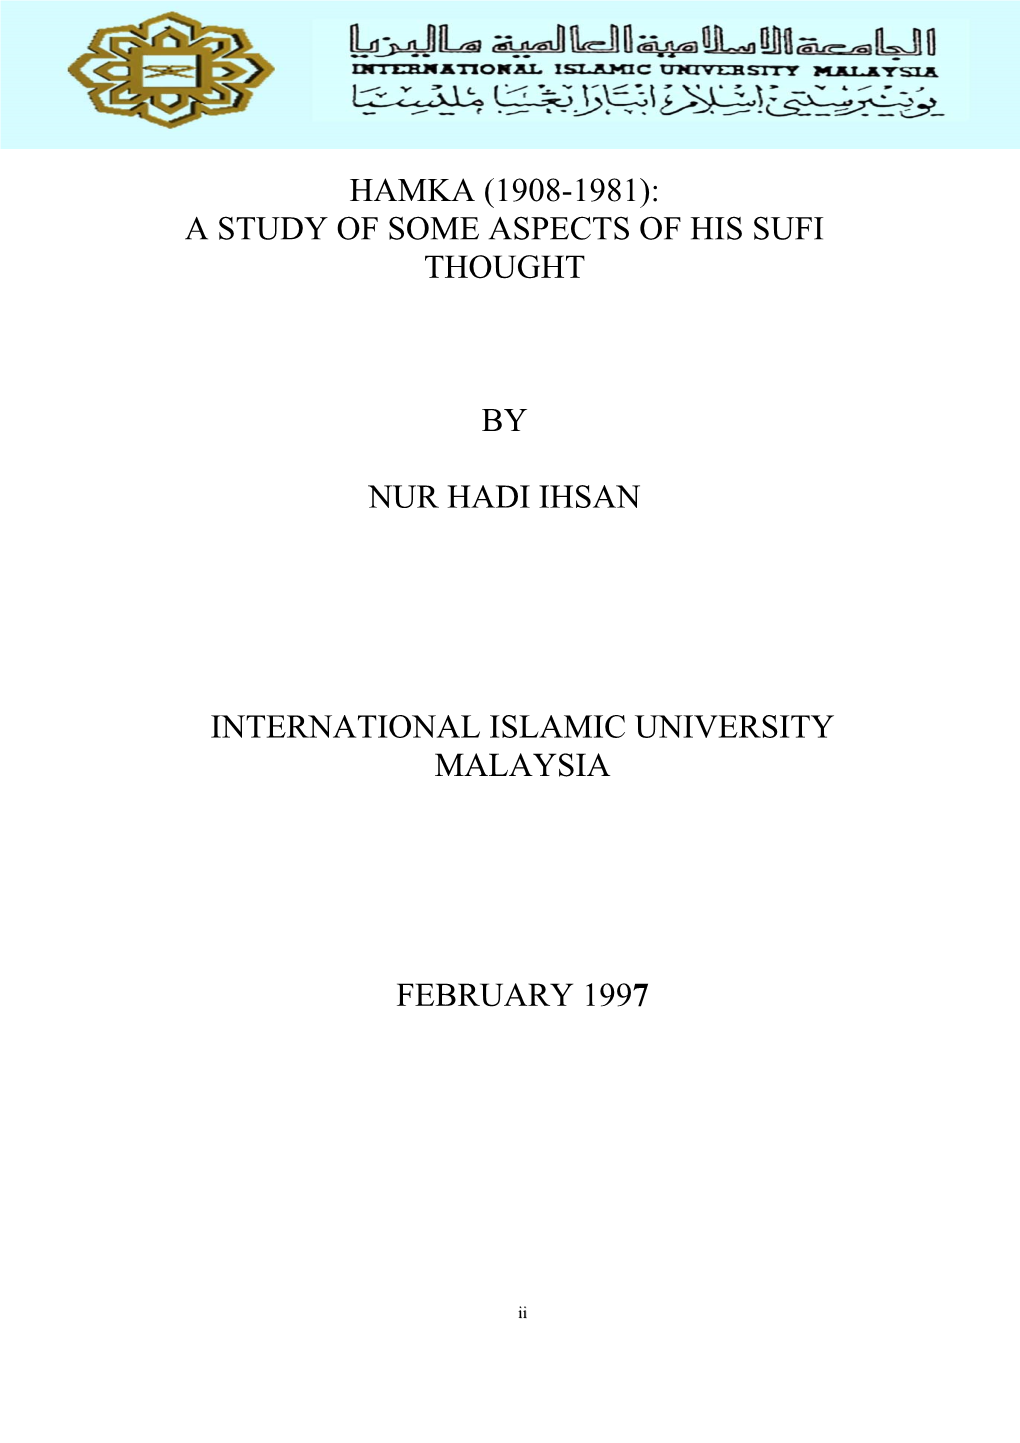 Hamka (1908-1981): a Study of Some Aspects of His Sufi Thoughts